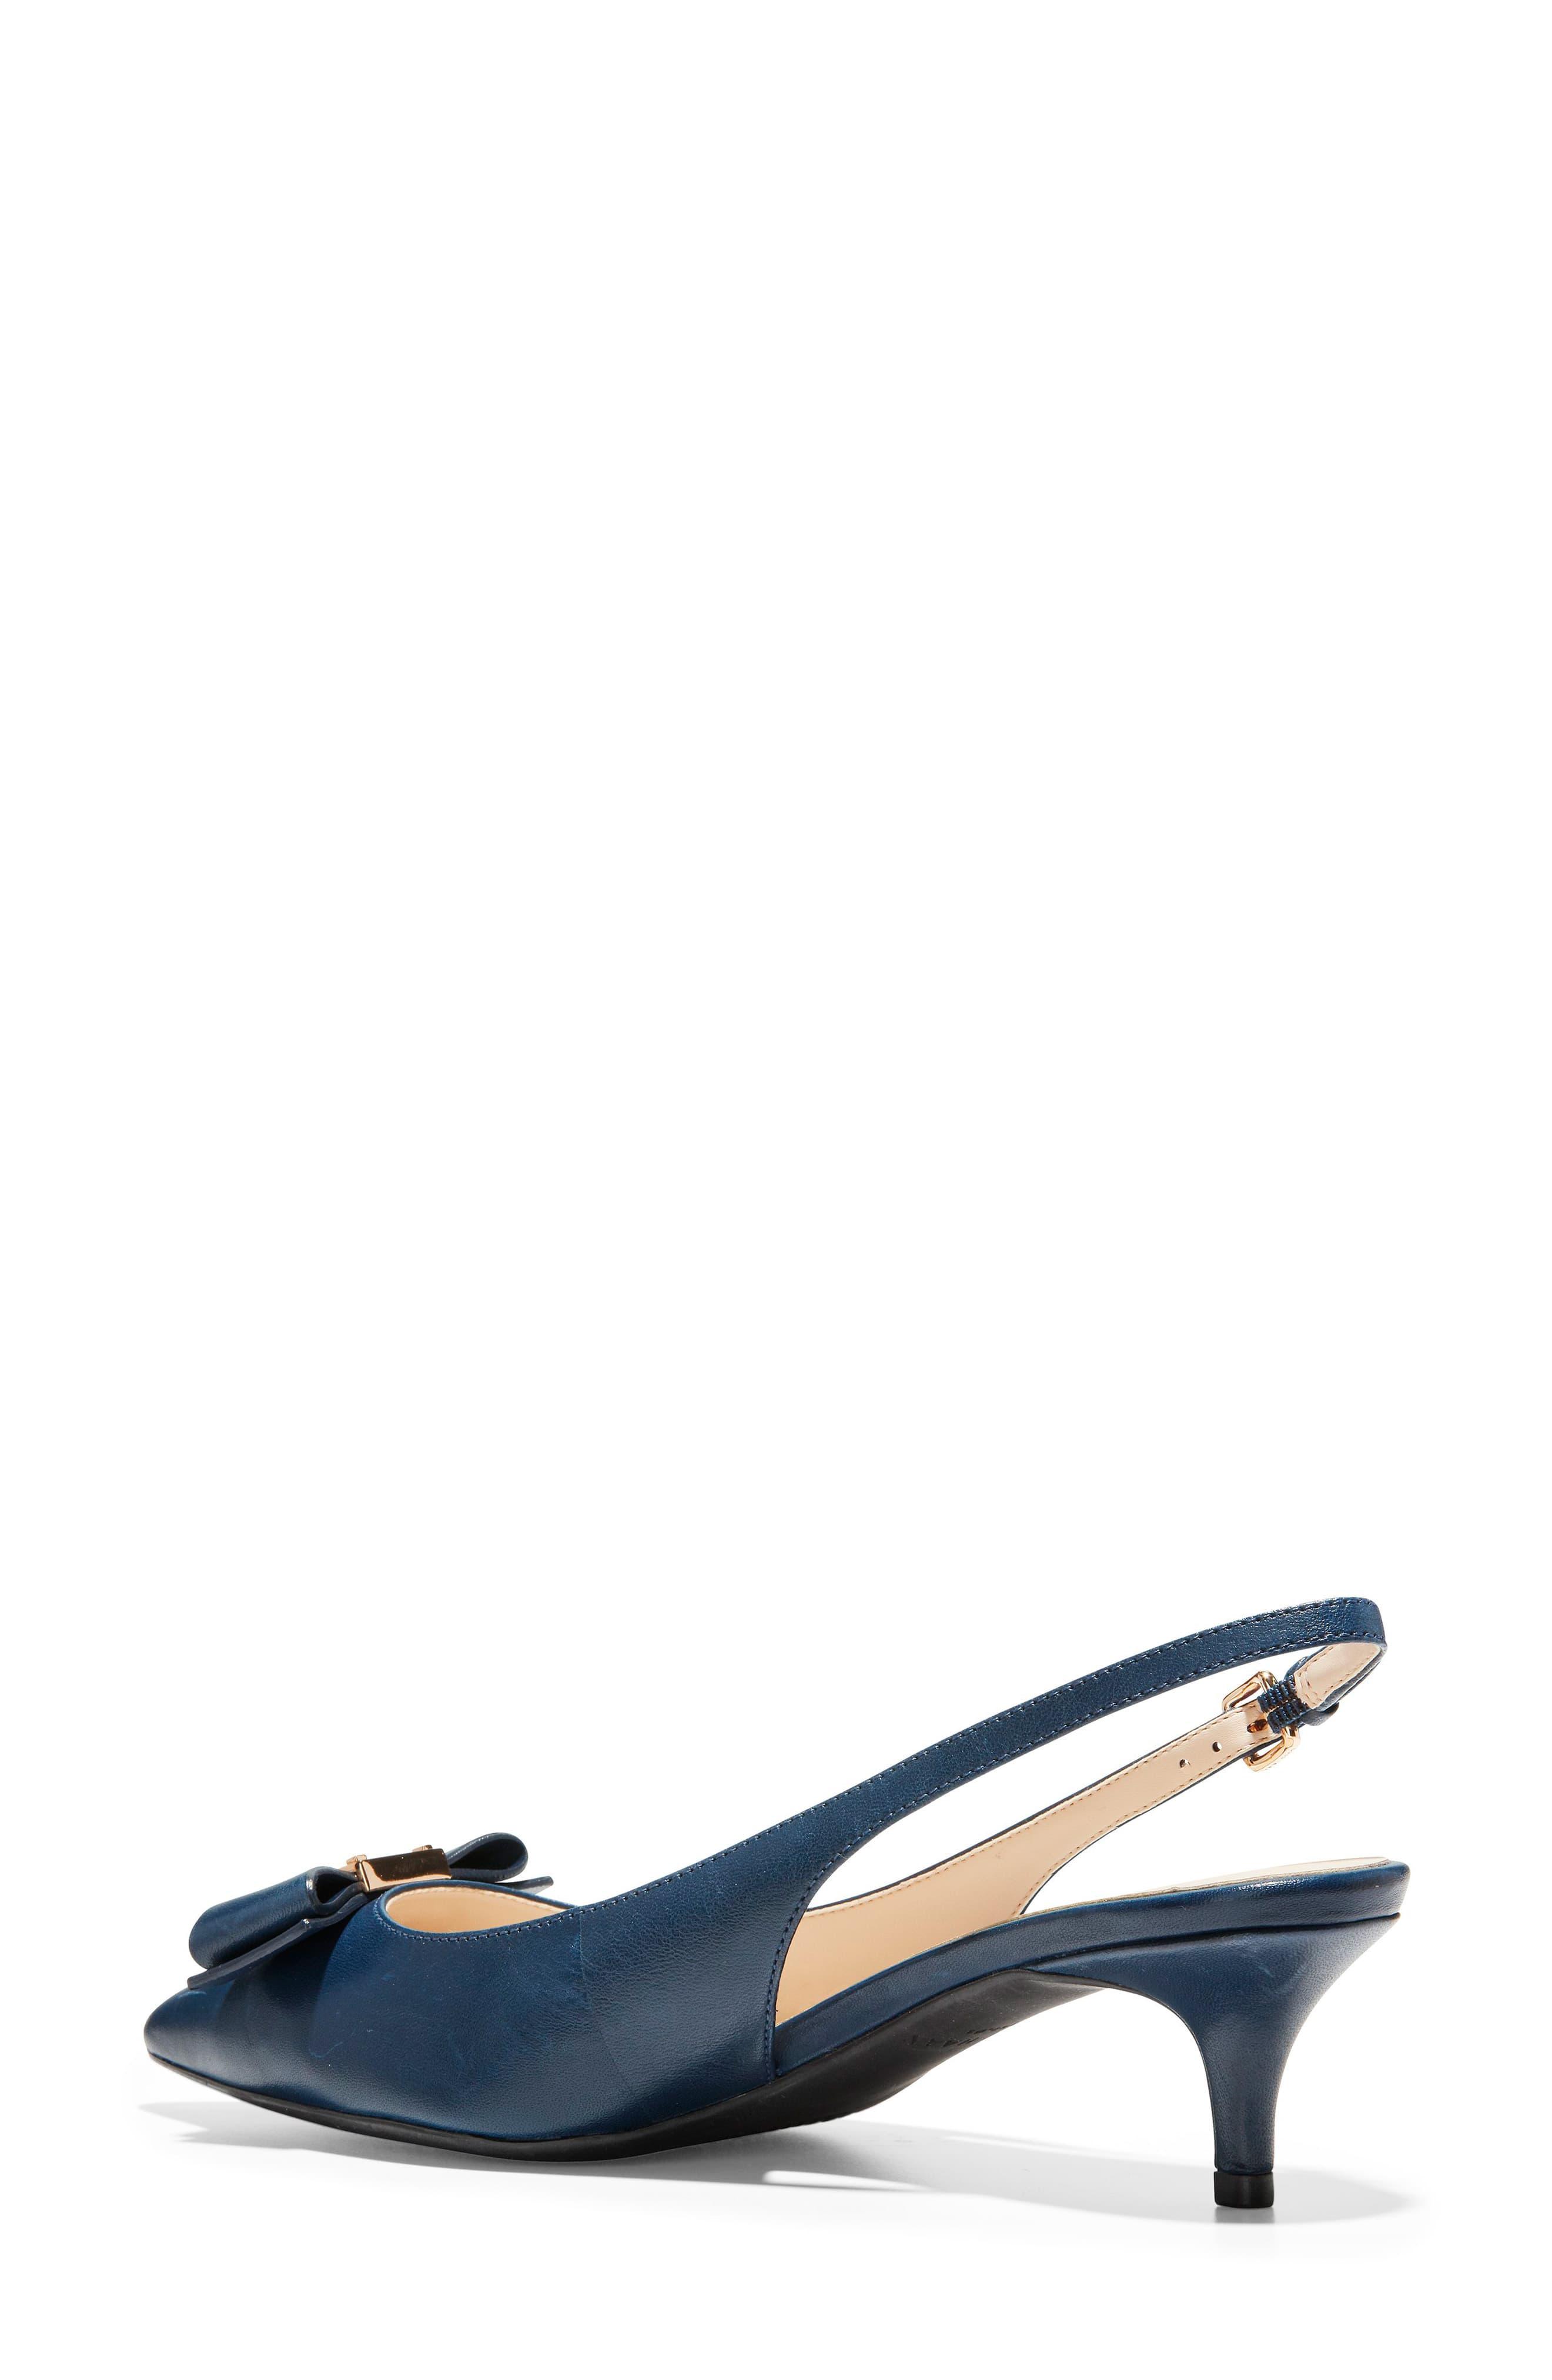 Cole Haan Tali Bow Slingback Pump in Blue - Lyst